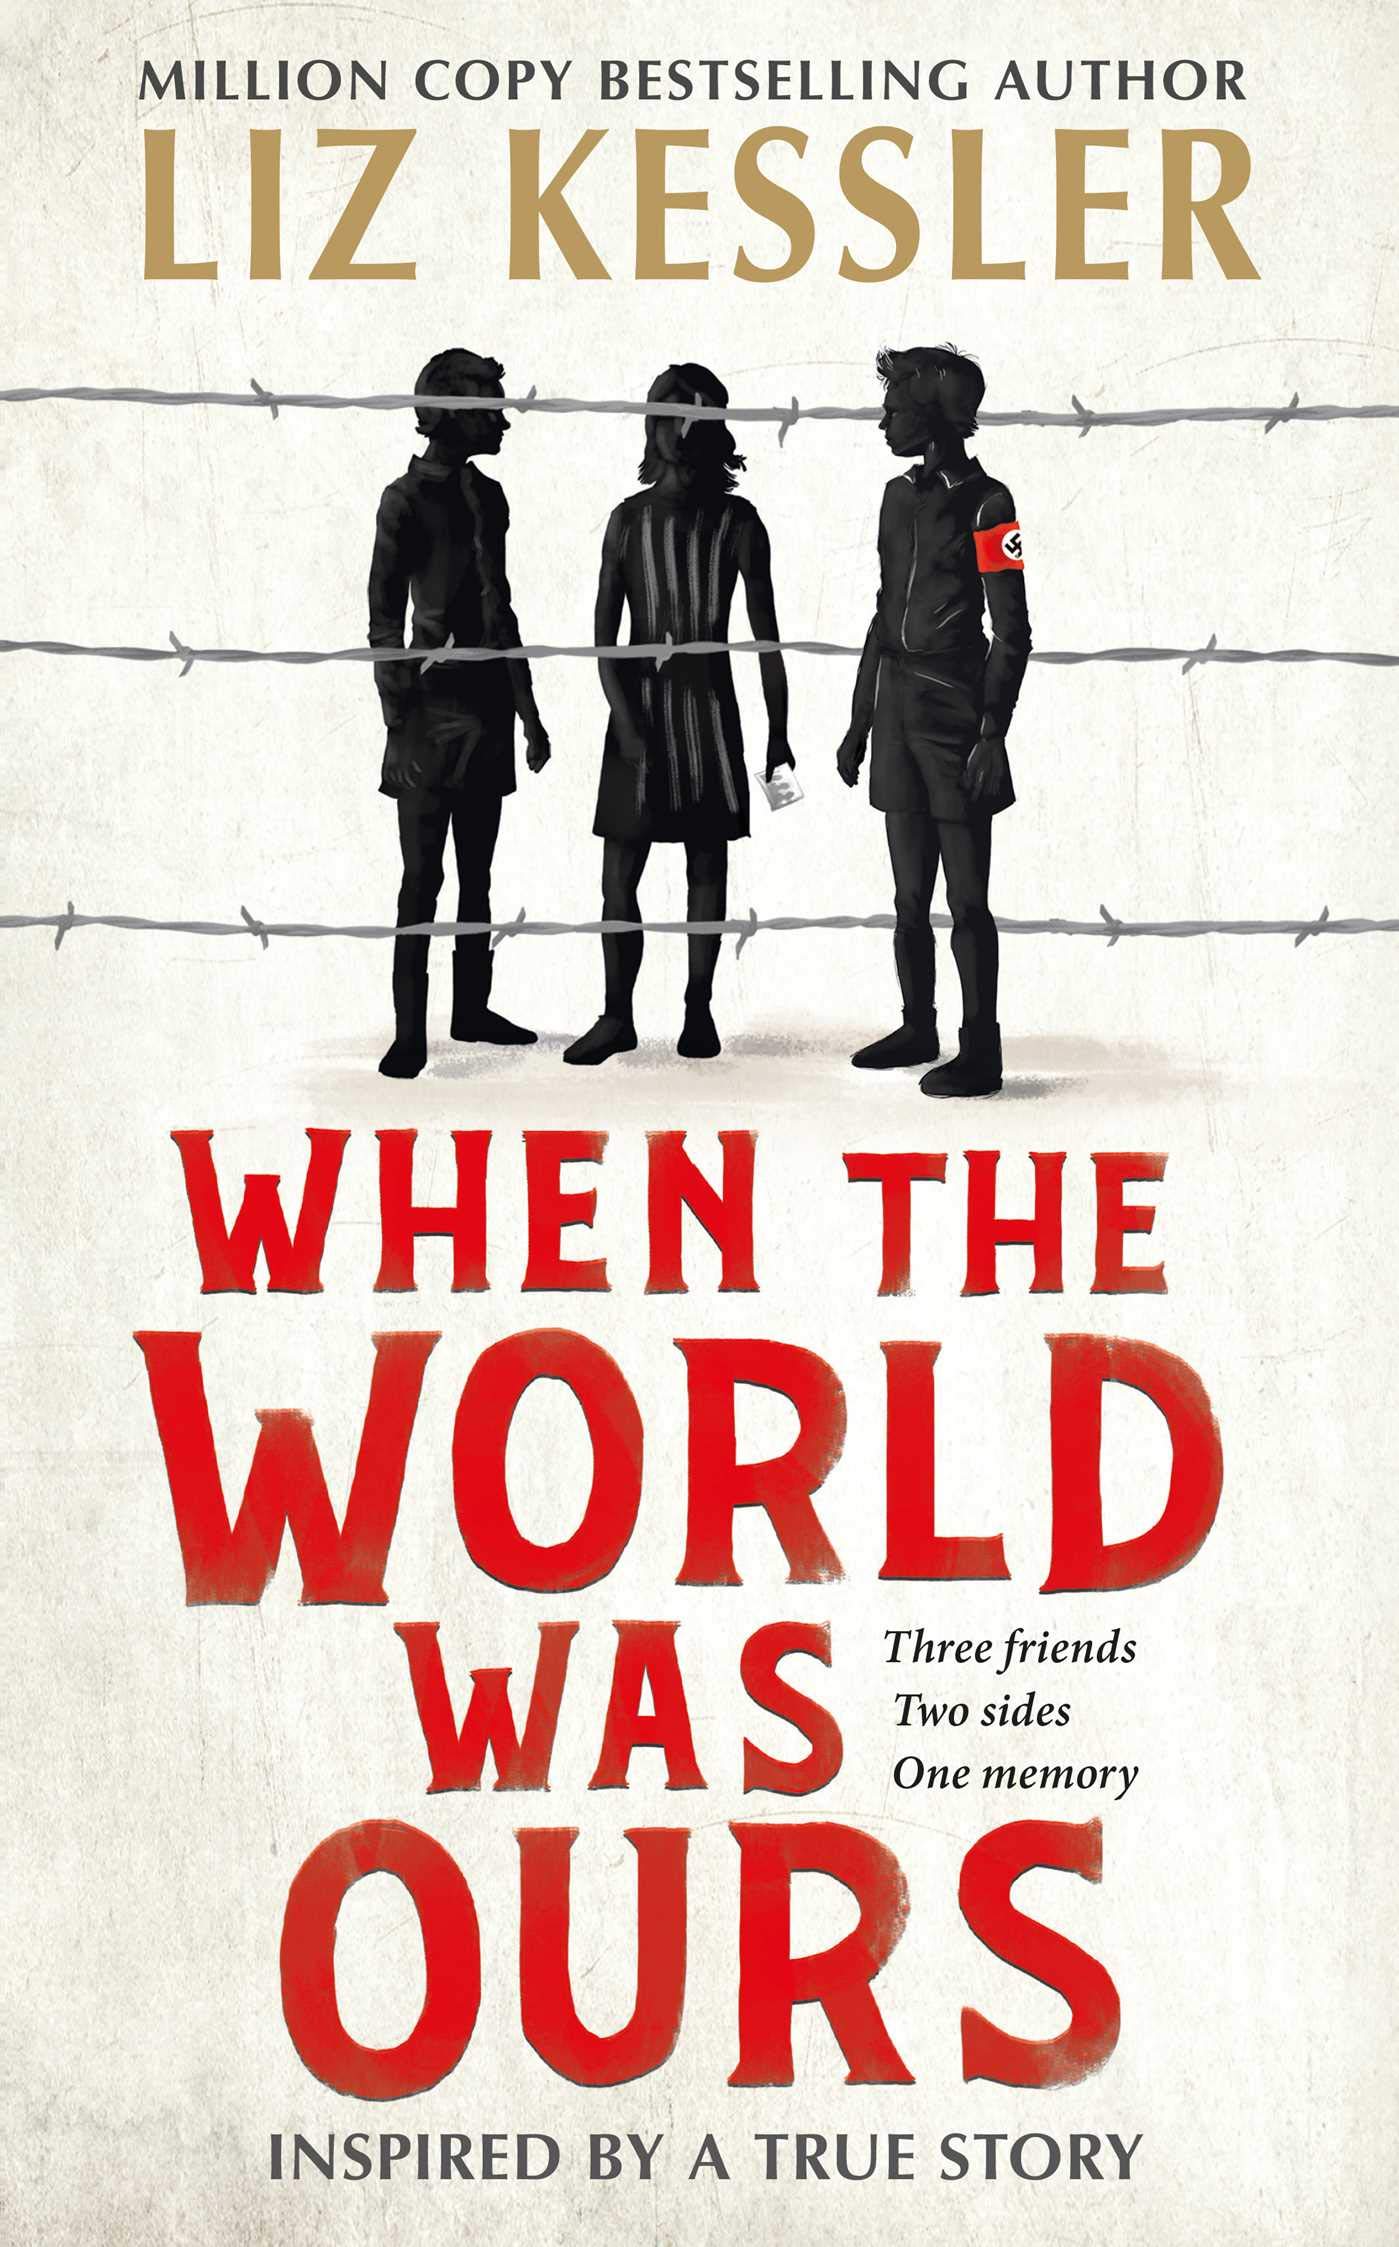 Book Review – When the World was Ours